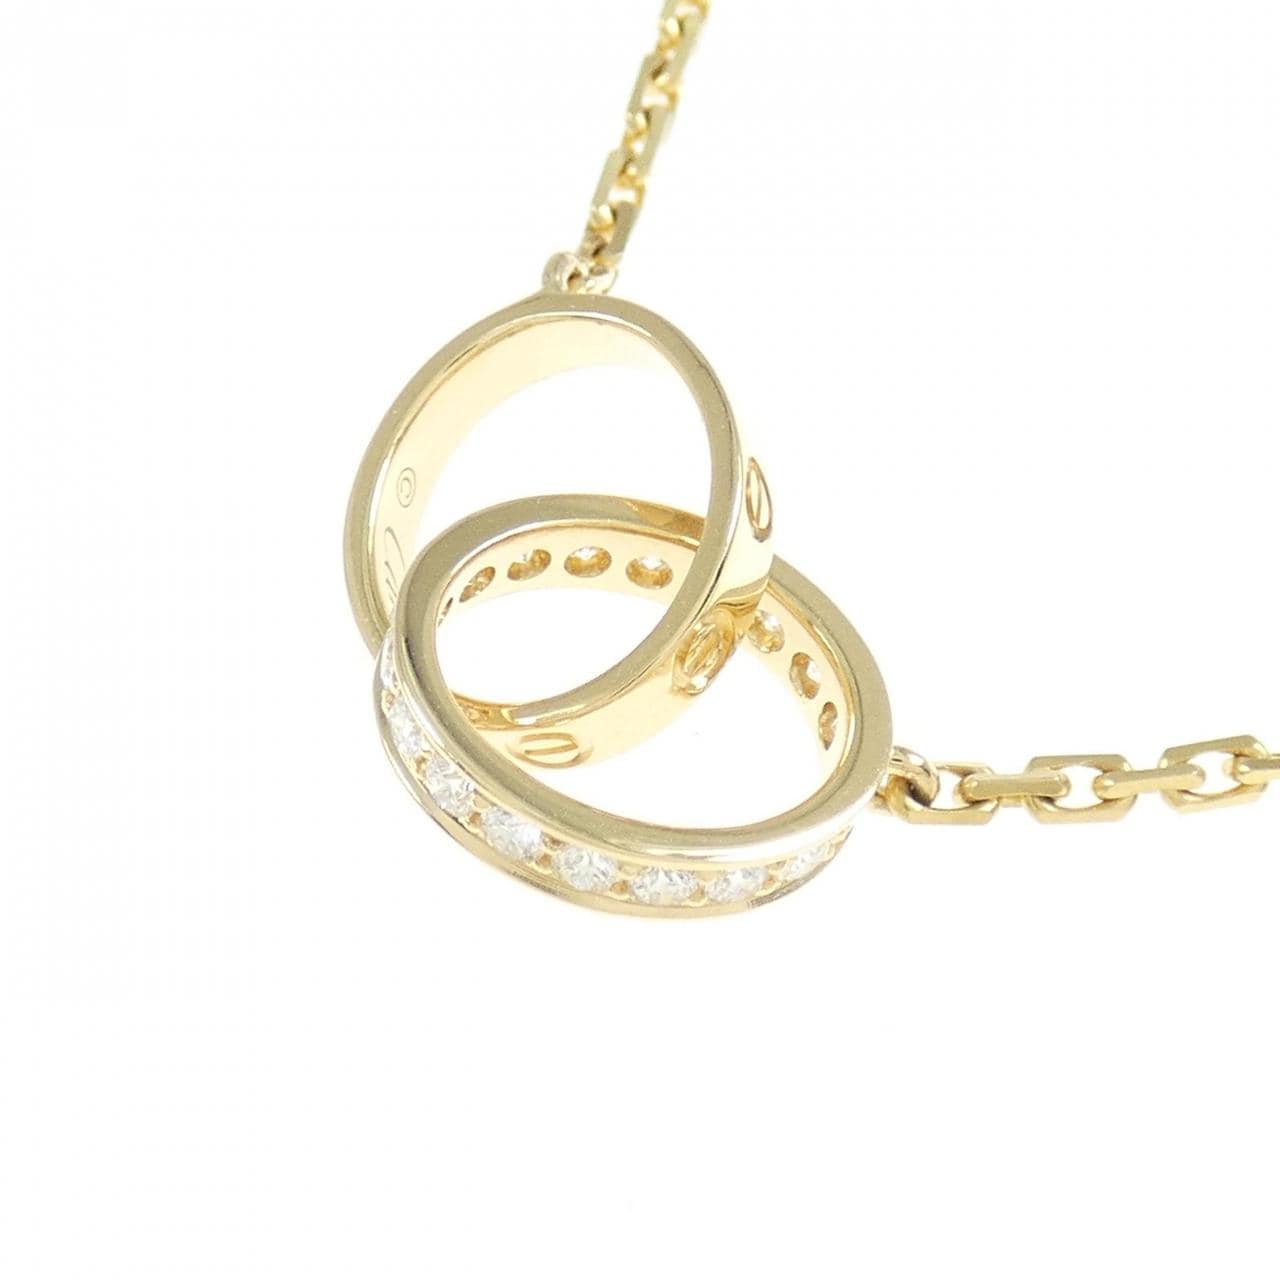 Cartier baby love necklace